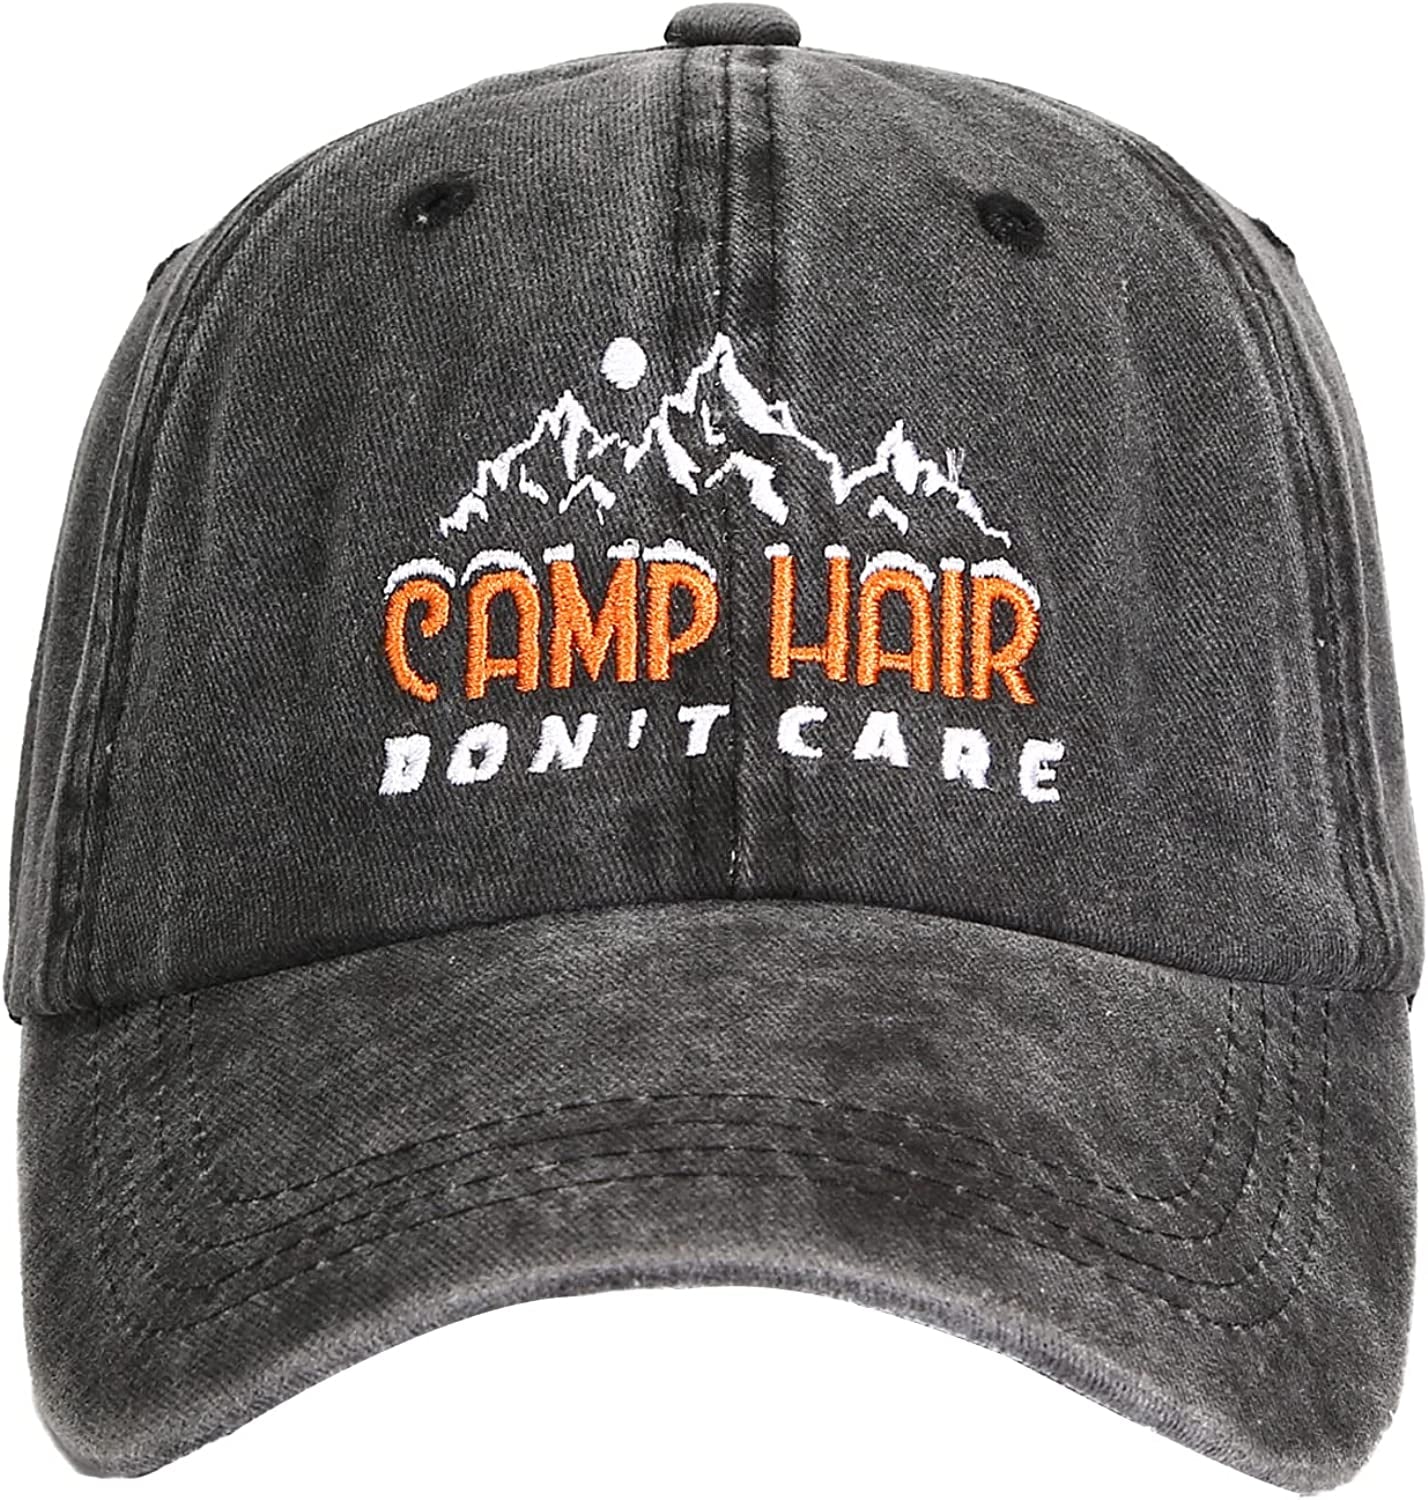  Embroidered Camping Hair Dont Care Baseball Cap